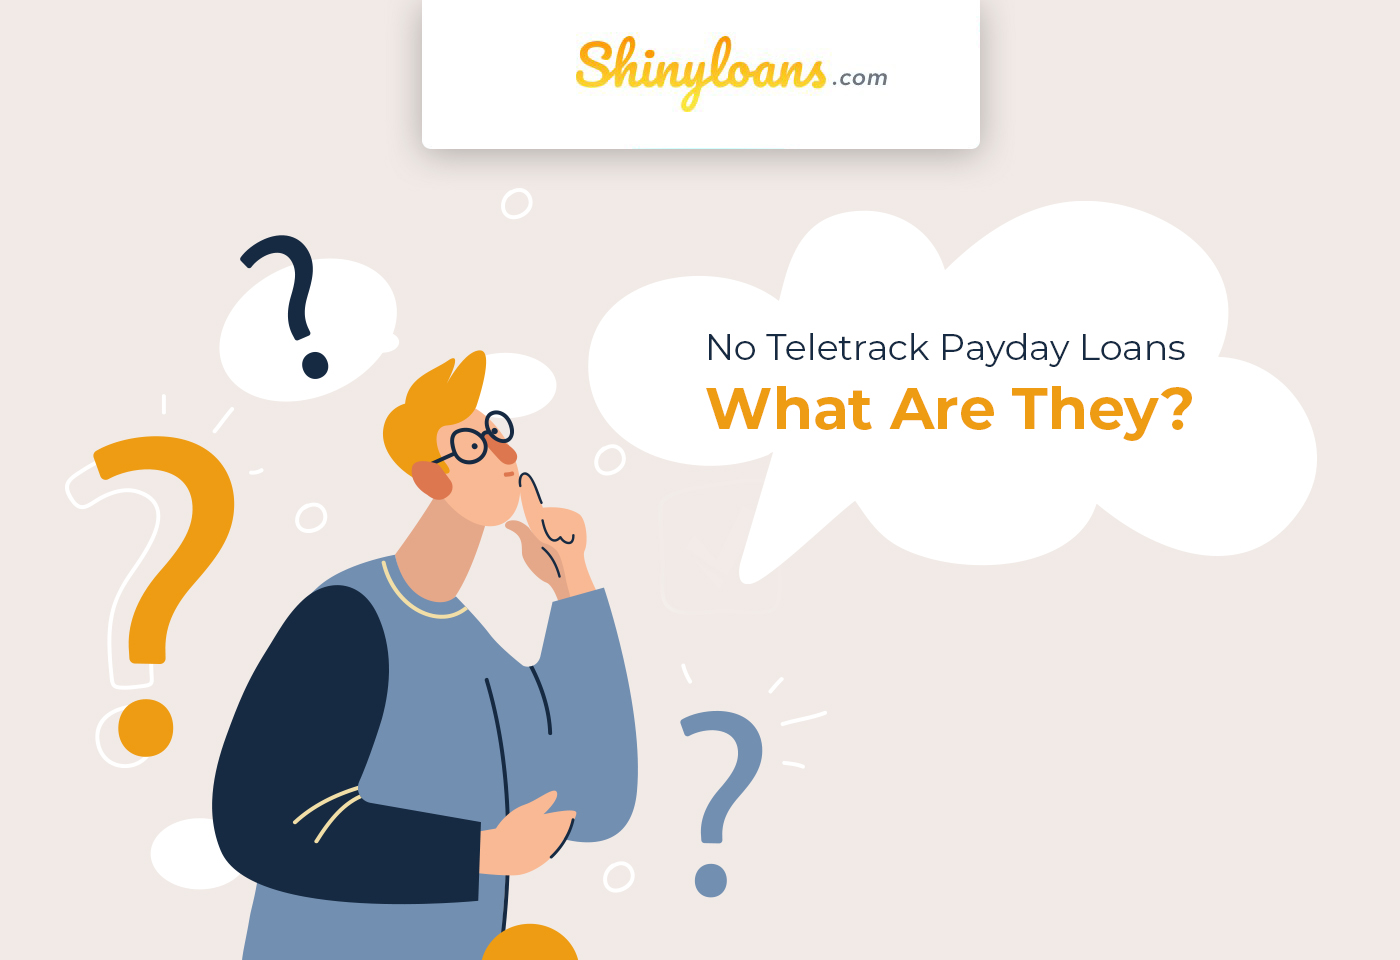 No Teletrack Payday Loans - What Are They?